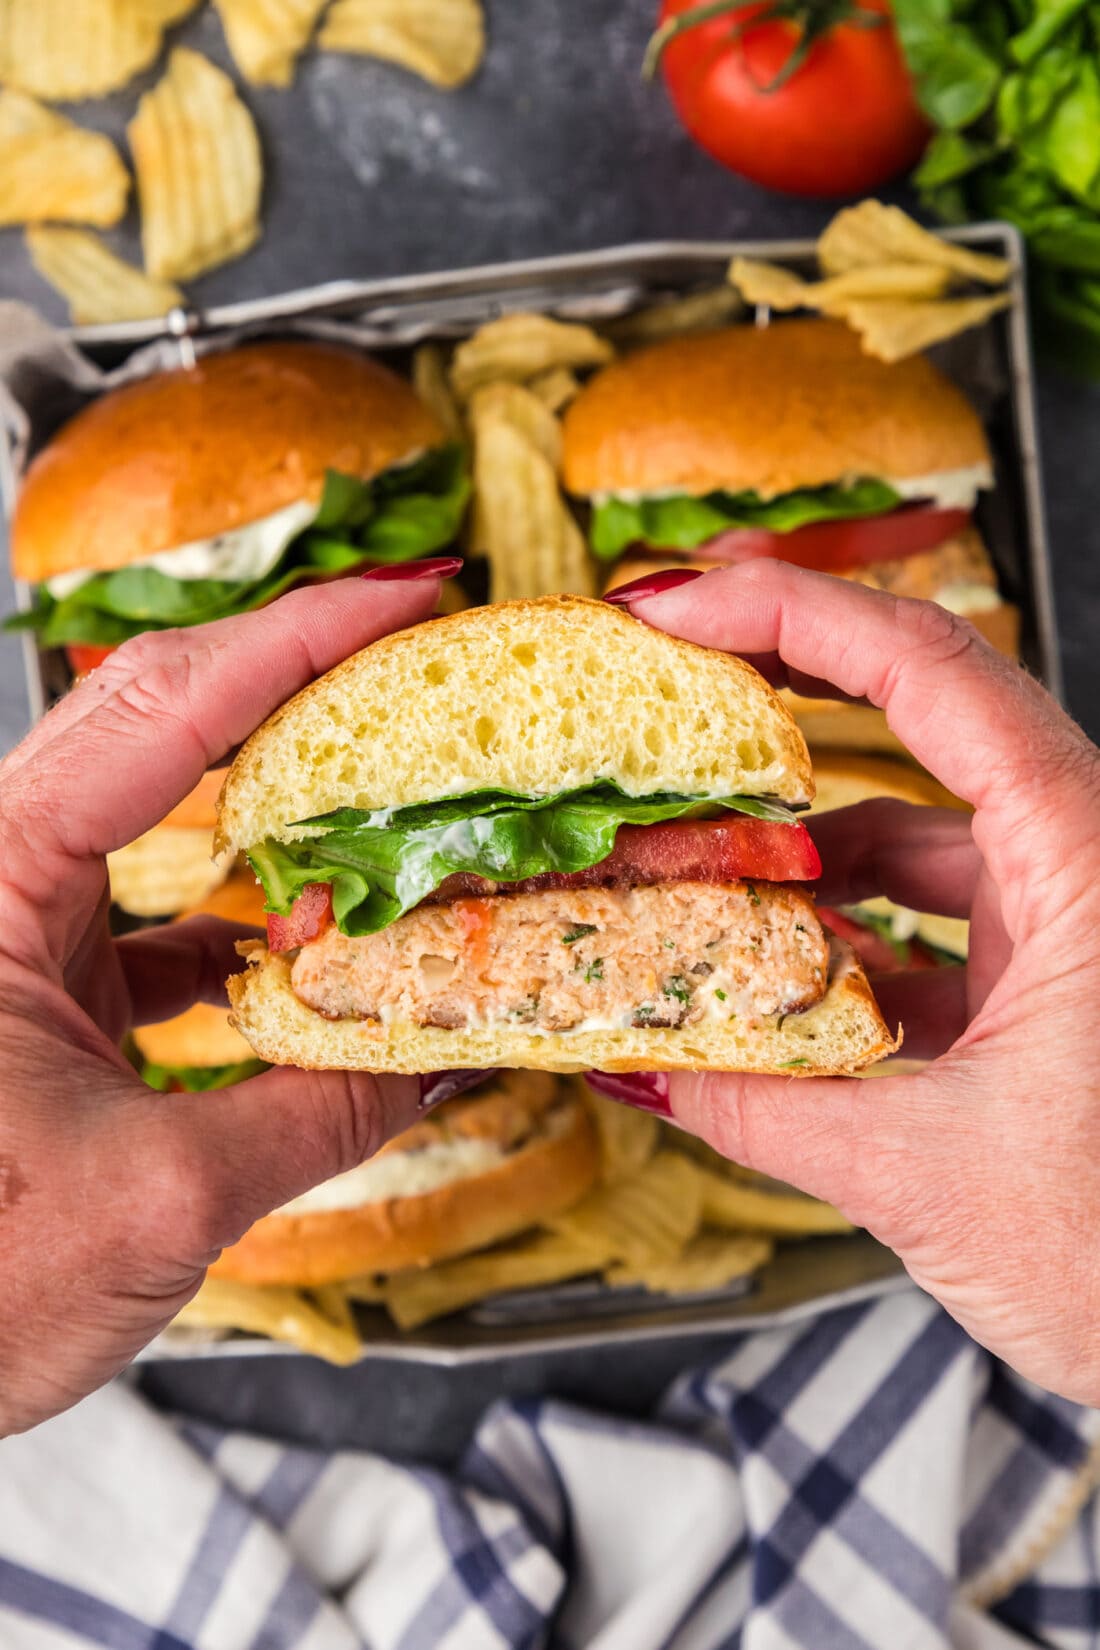 Hands holding up a half of a Salmon Burger